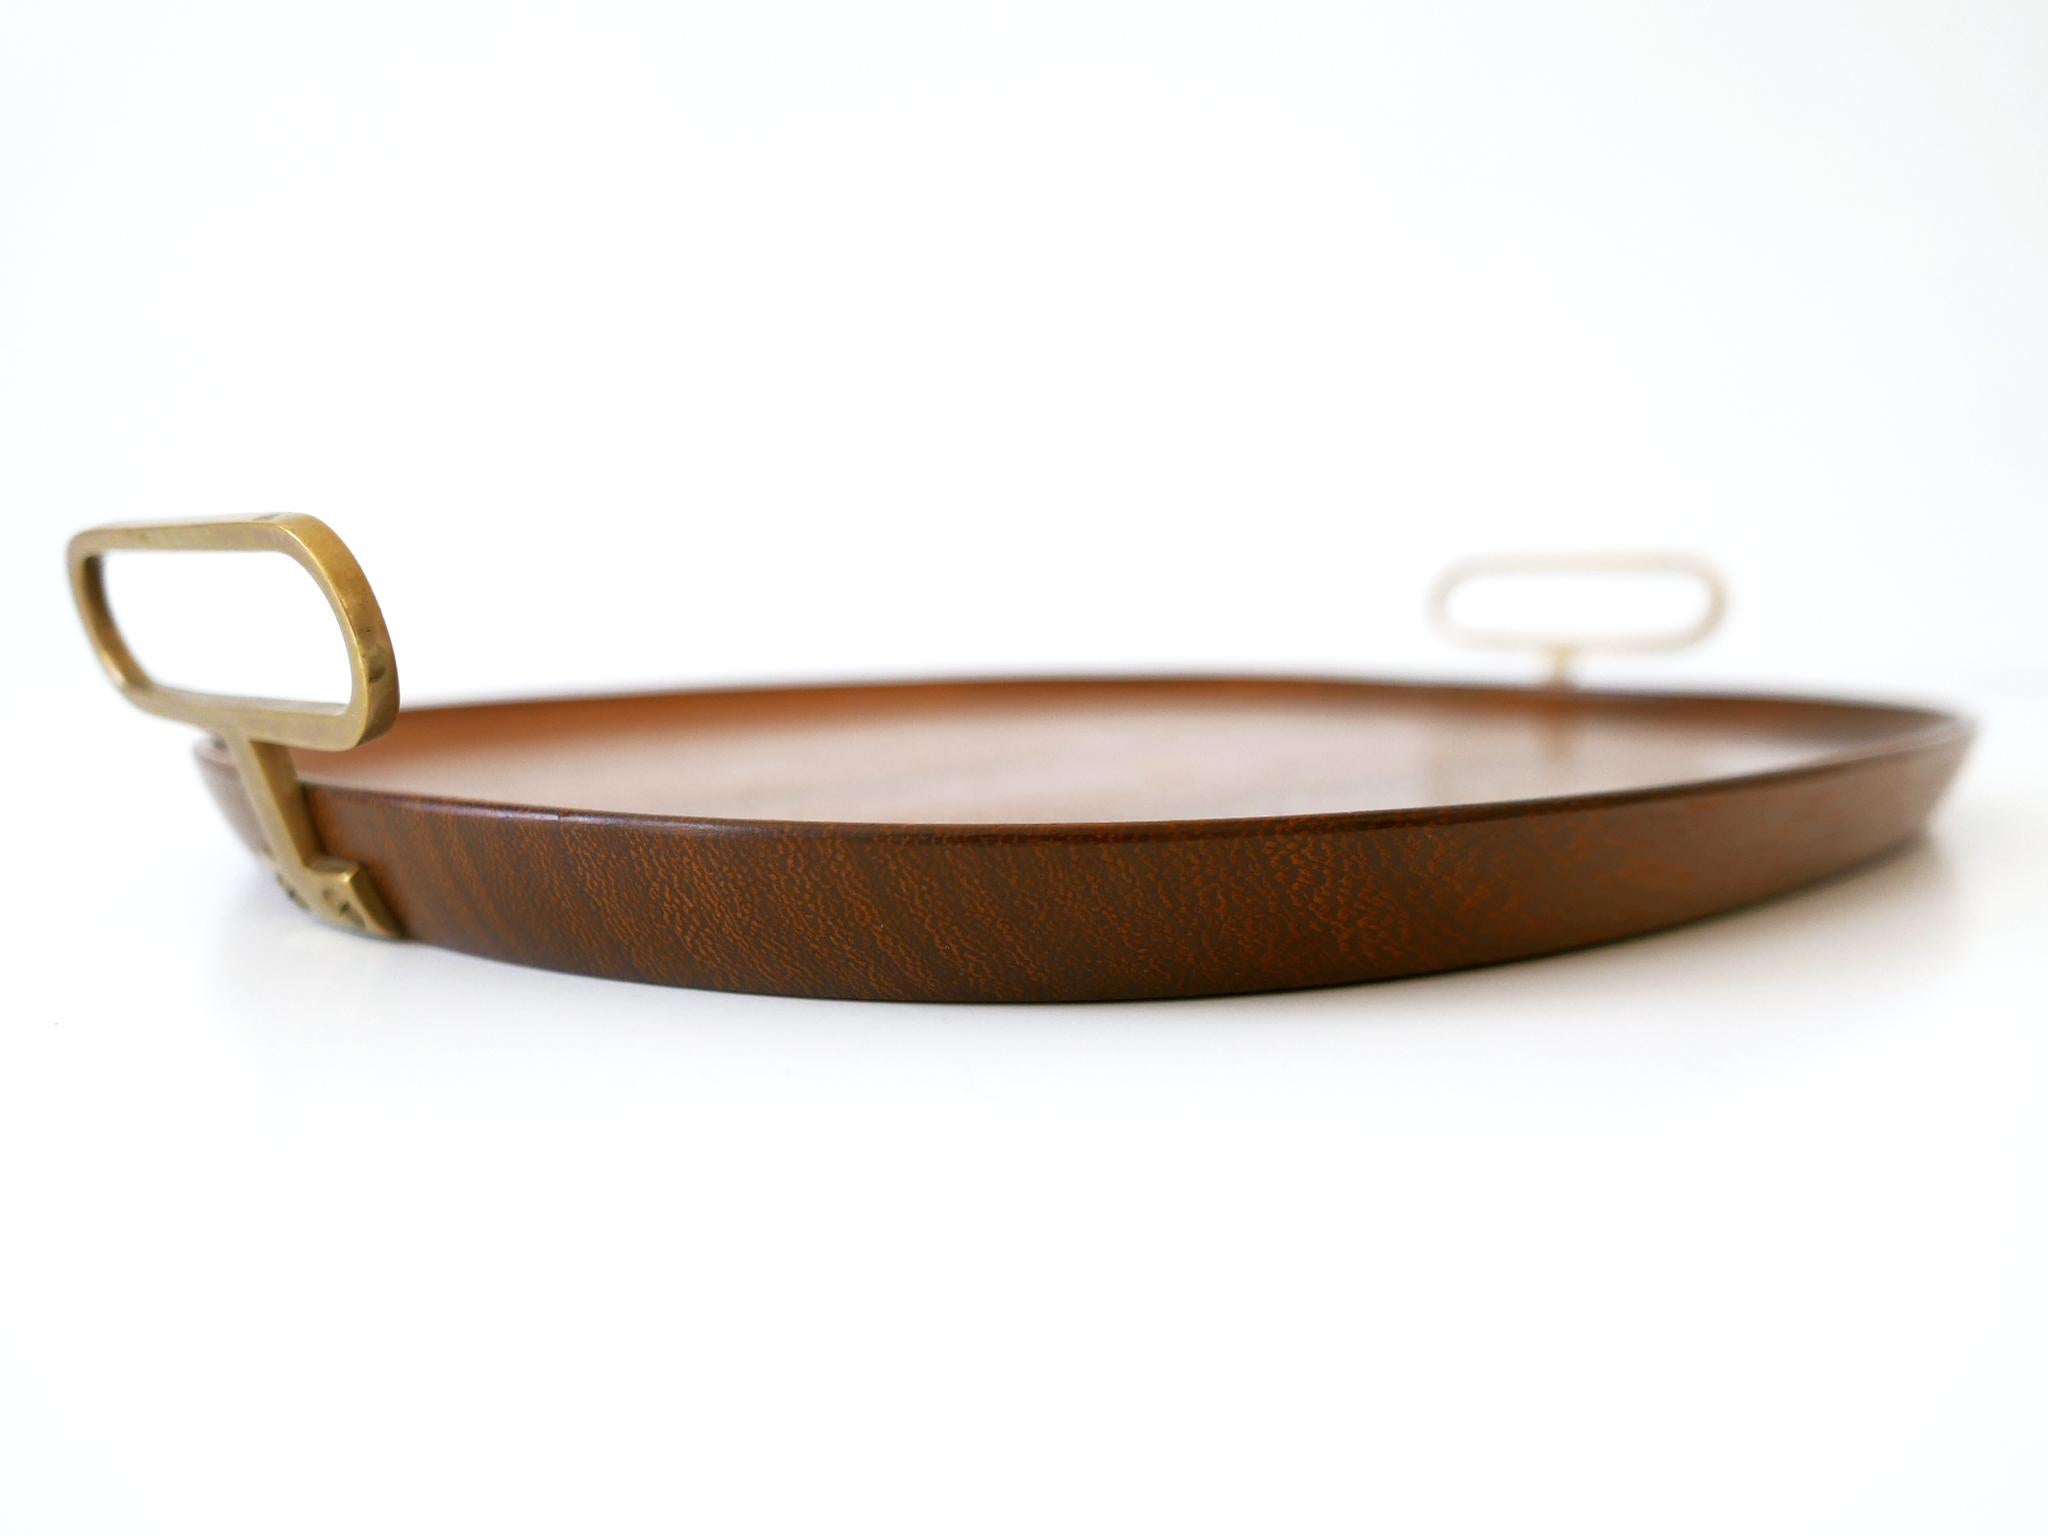 Extremely Rare Mid-Century Modern Teak Serving Tray by Carl Auböck Austria 1950s For Sale 4